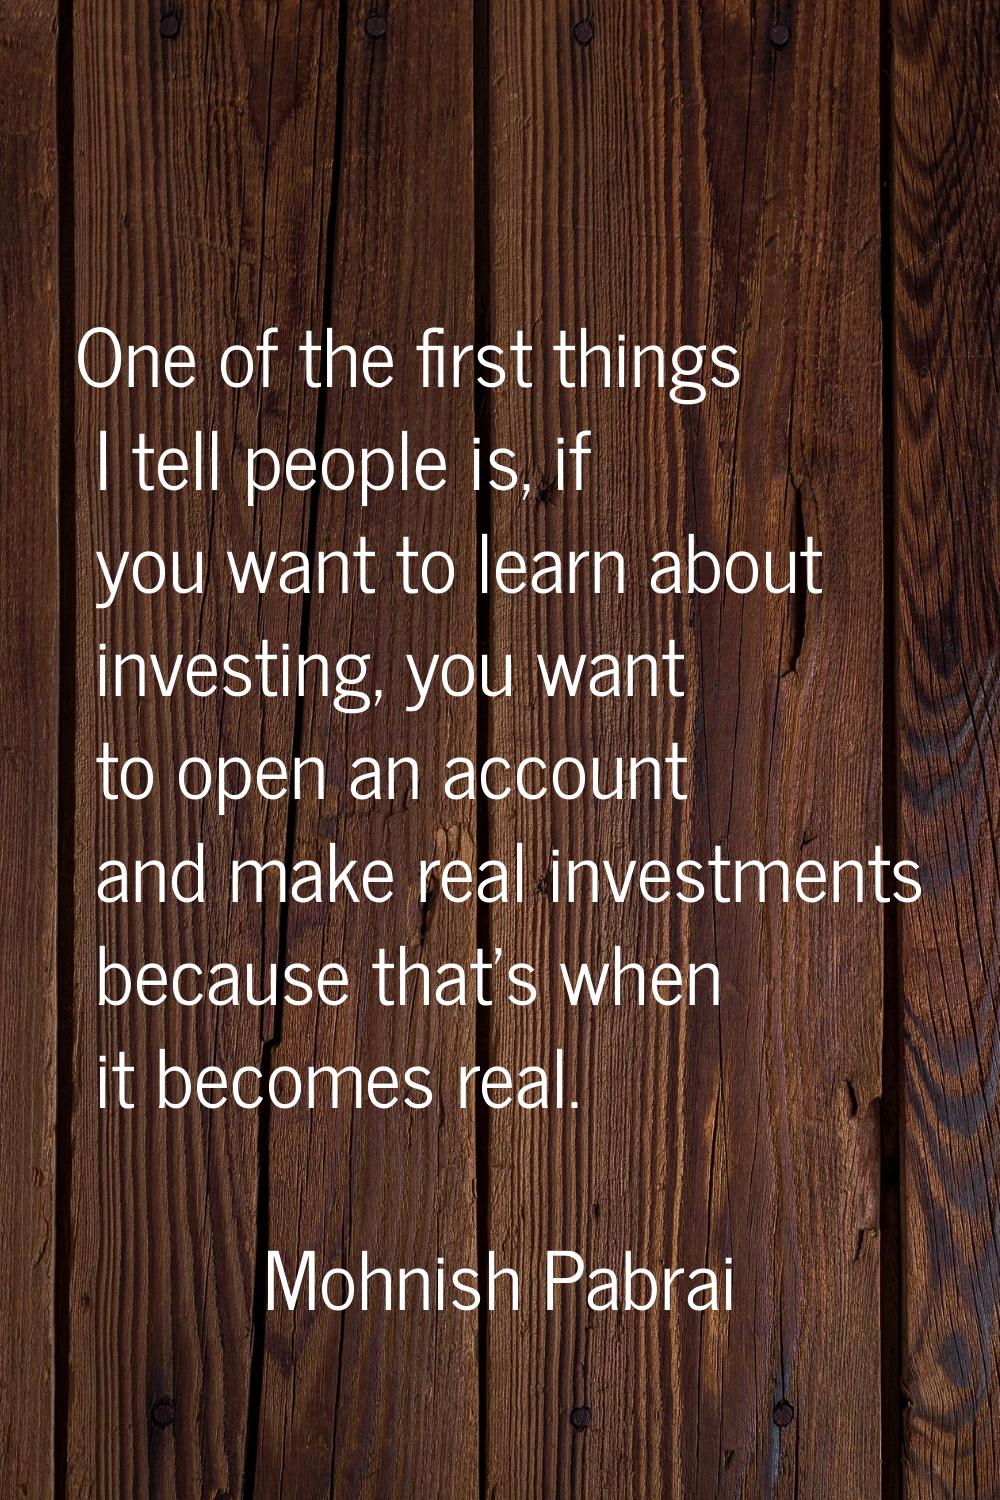 One of the first things I tell people is, if you want to learn about investing, you want to open an